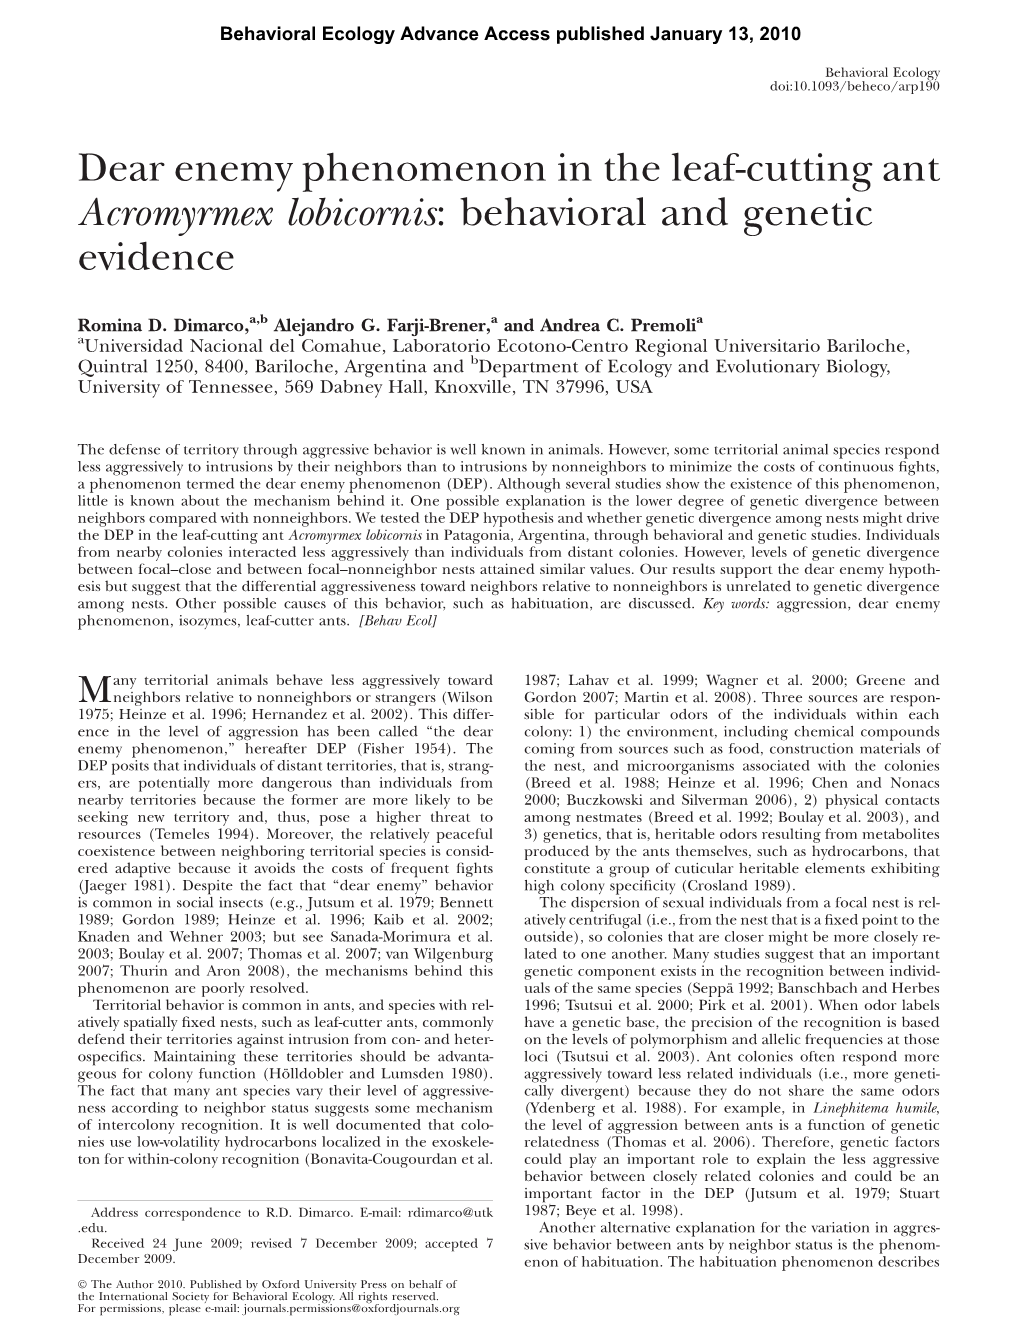 Dear Enemy Phenomenon in the Leaf-Cutting Ant Acromyrmex Lobicornis: Behavioral and Genetic Evidence